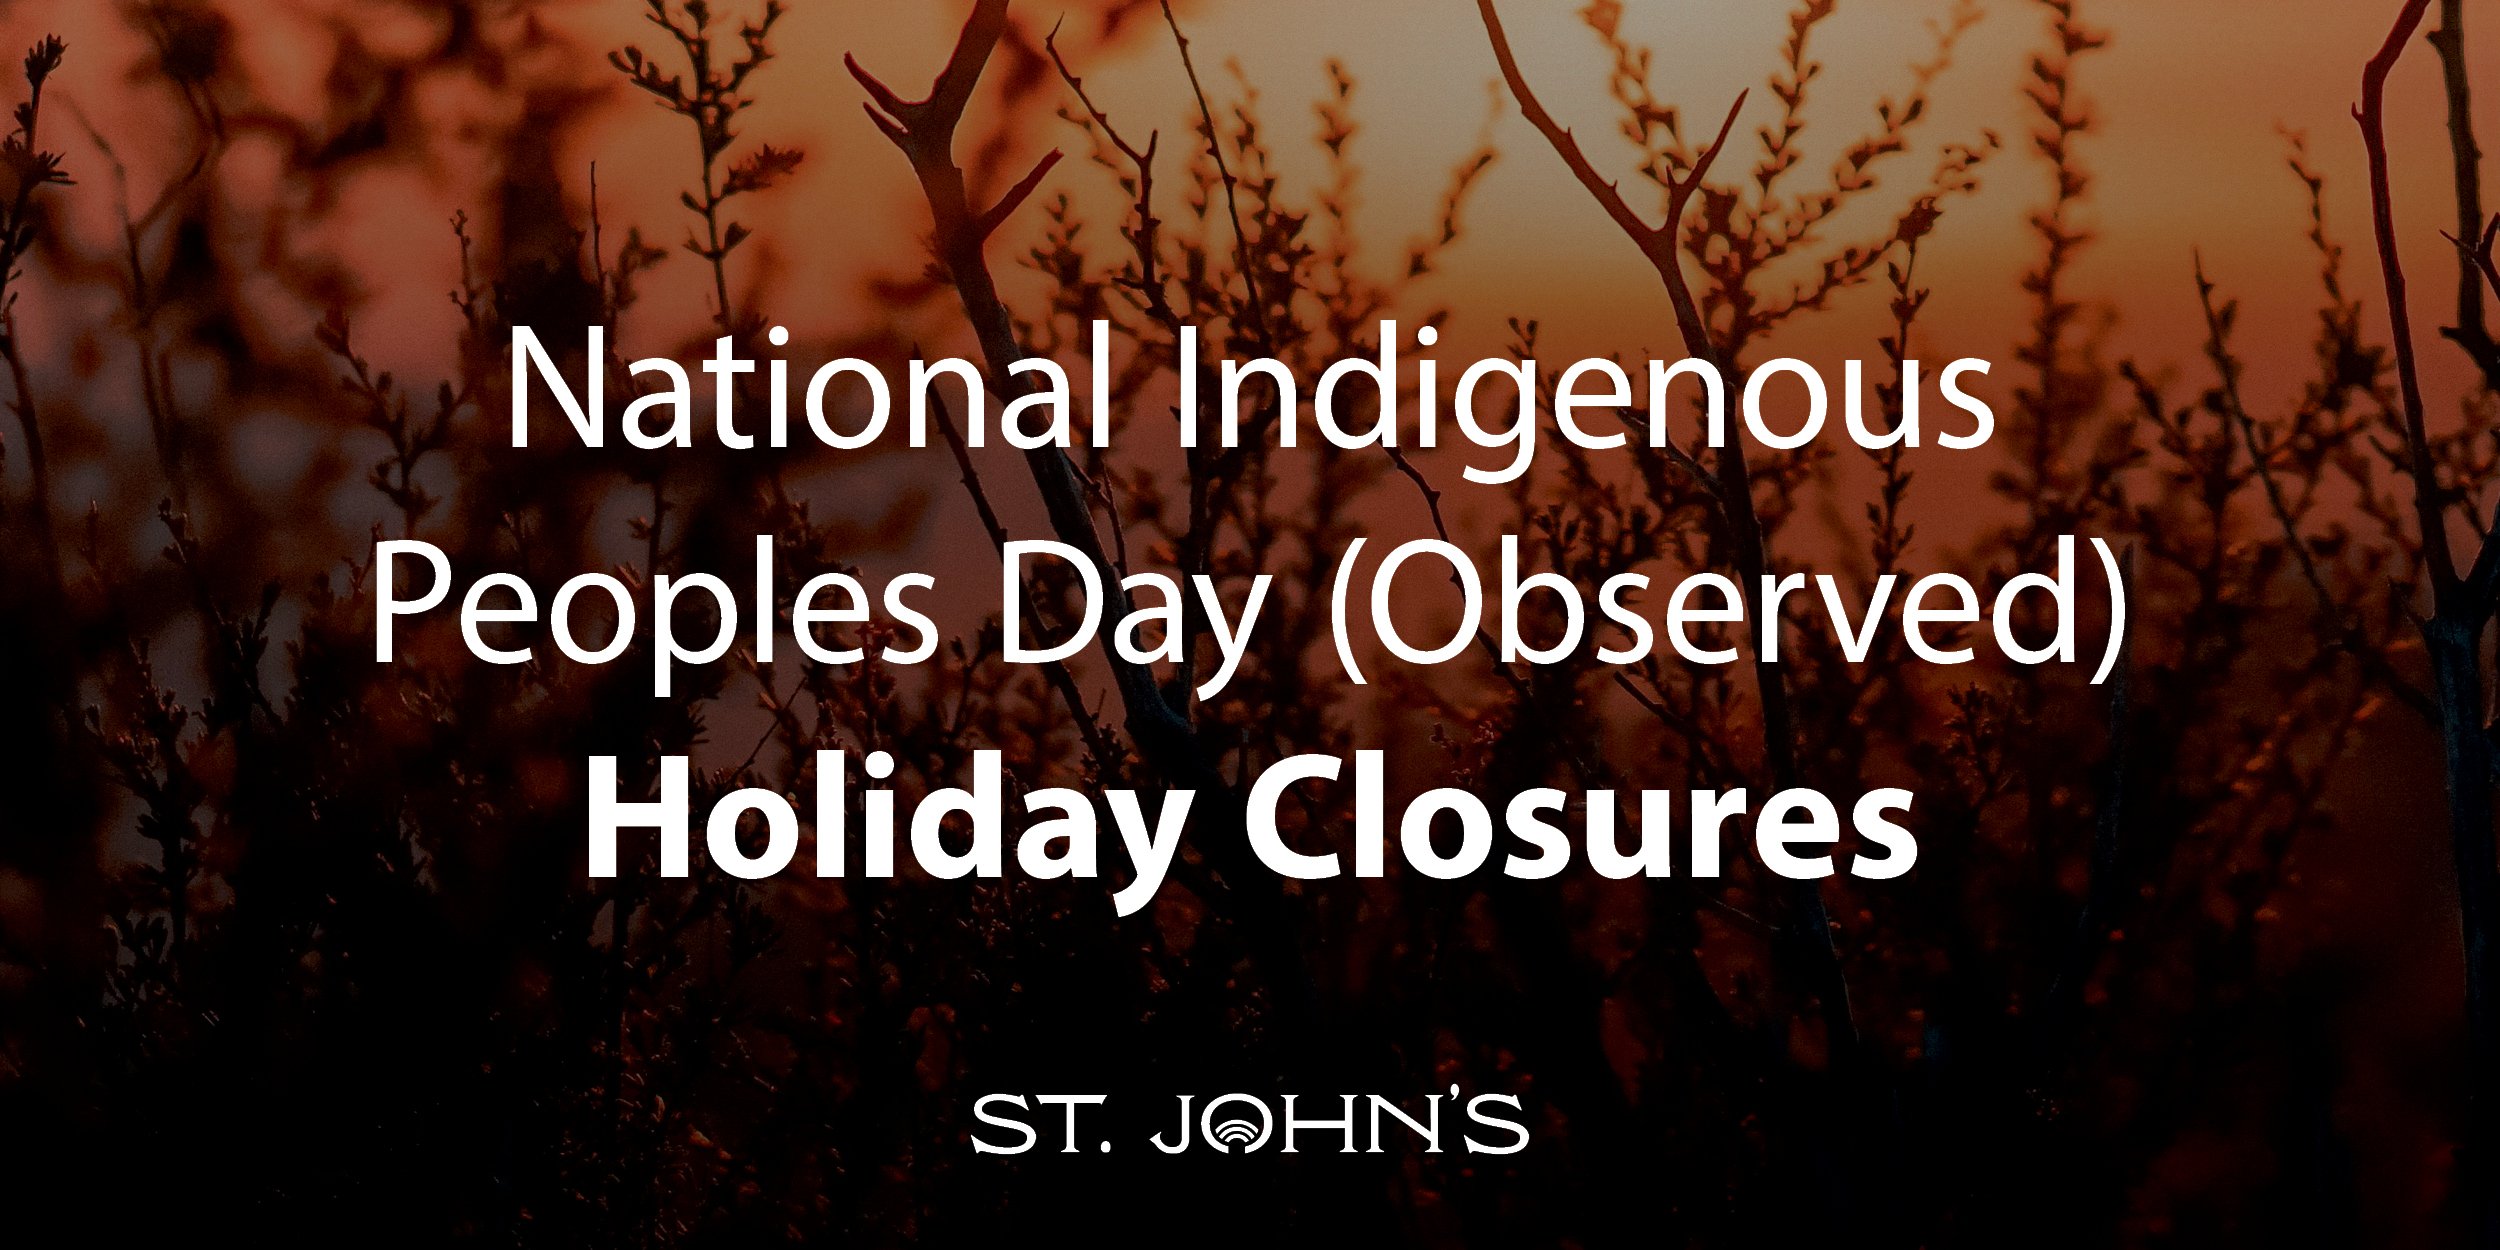 Trees and sunset in the background with white text "National Indigenous Peoples Day (Observed) Holiday Closures" with the City of St. John's logo